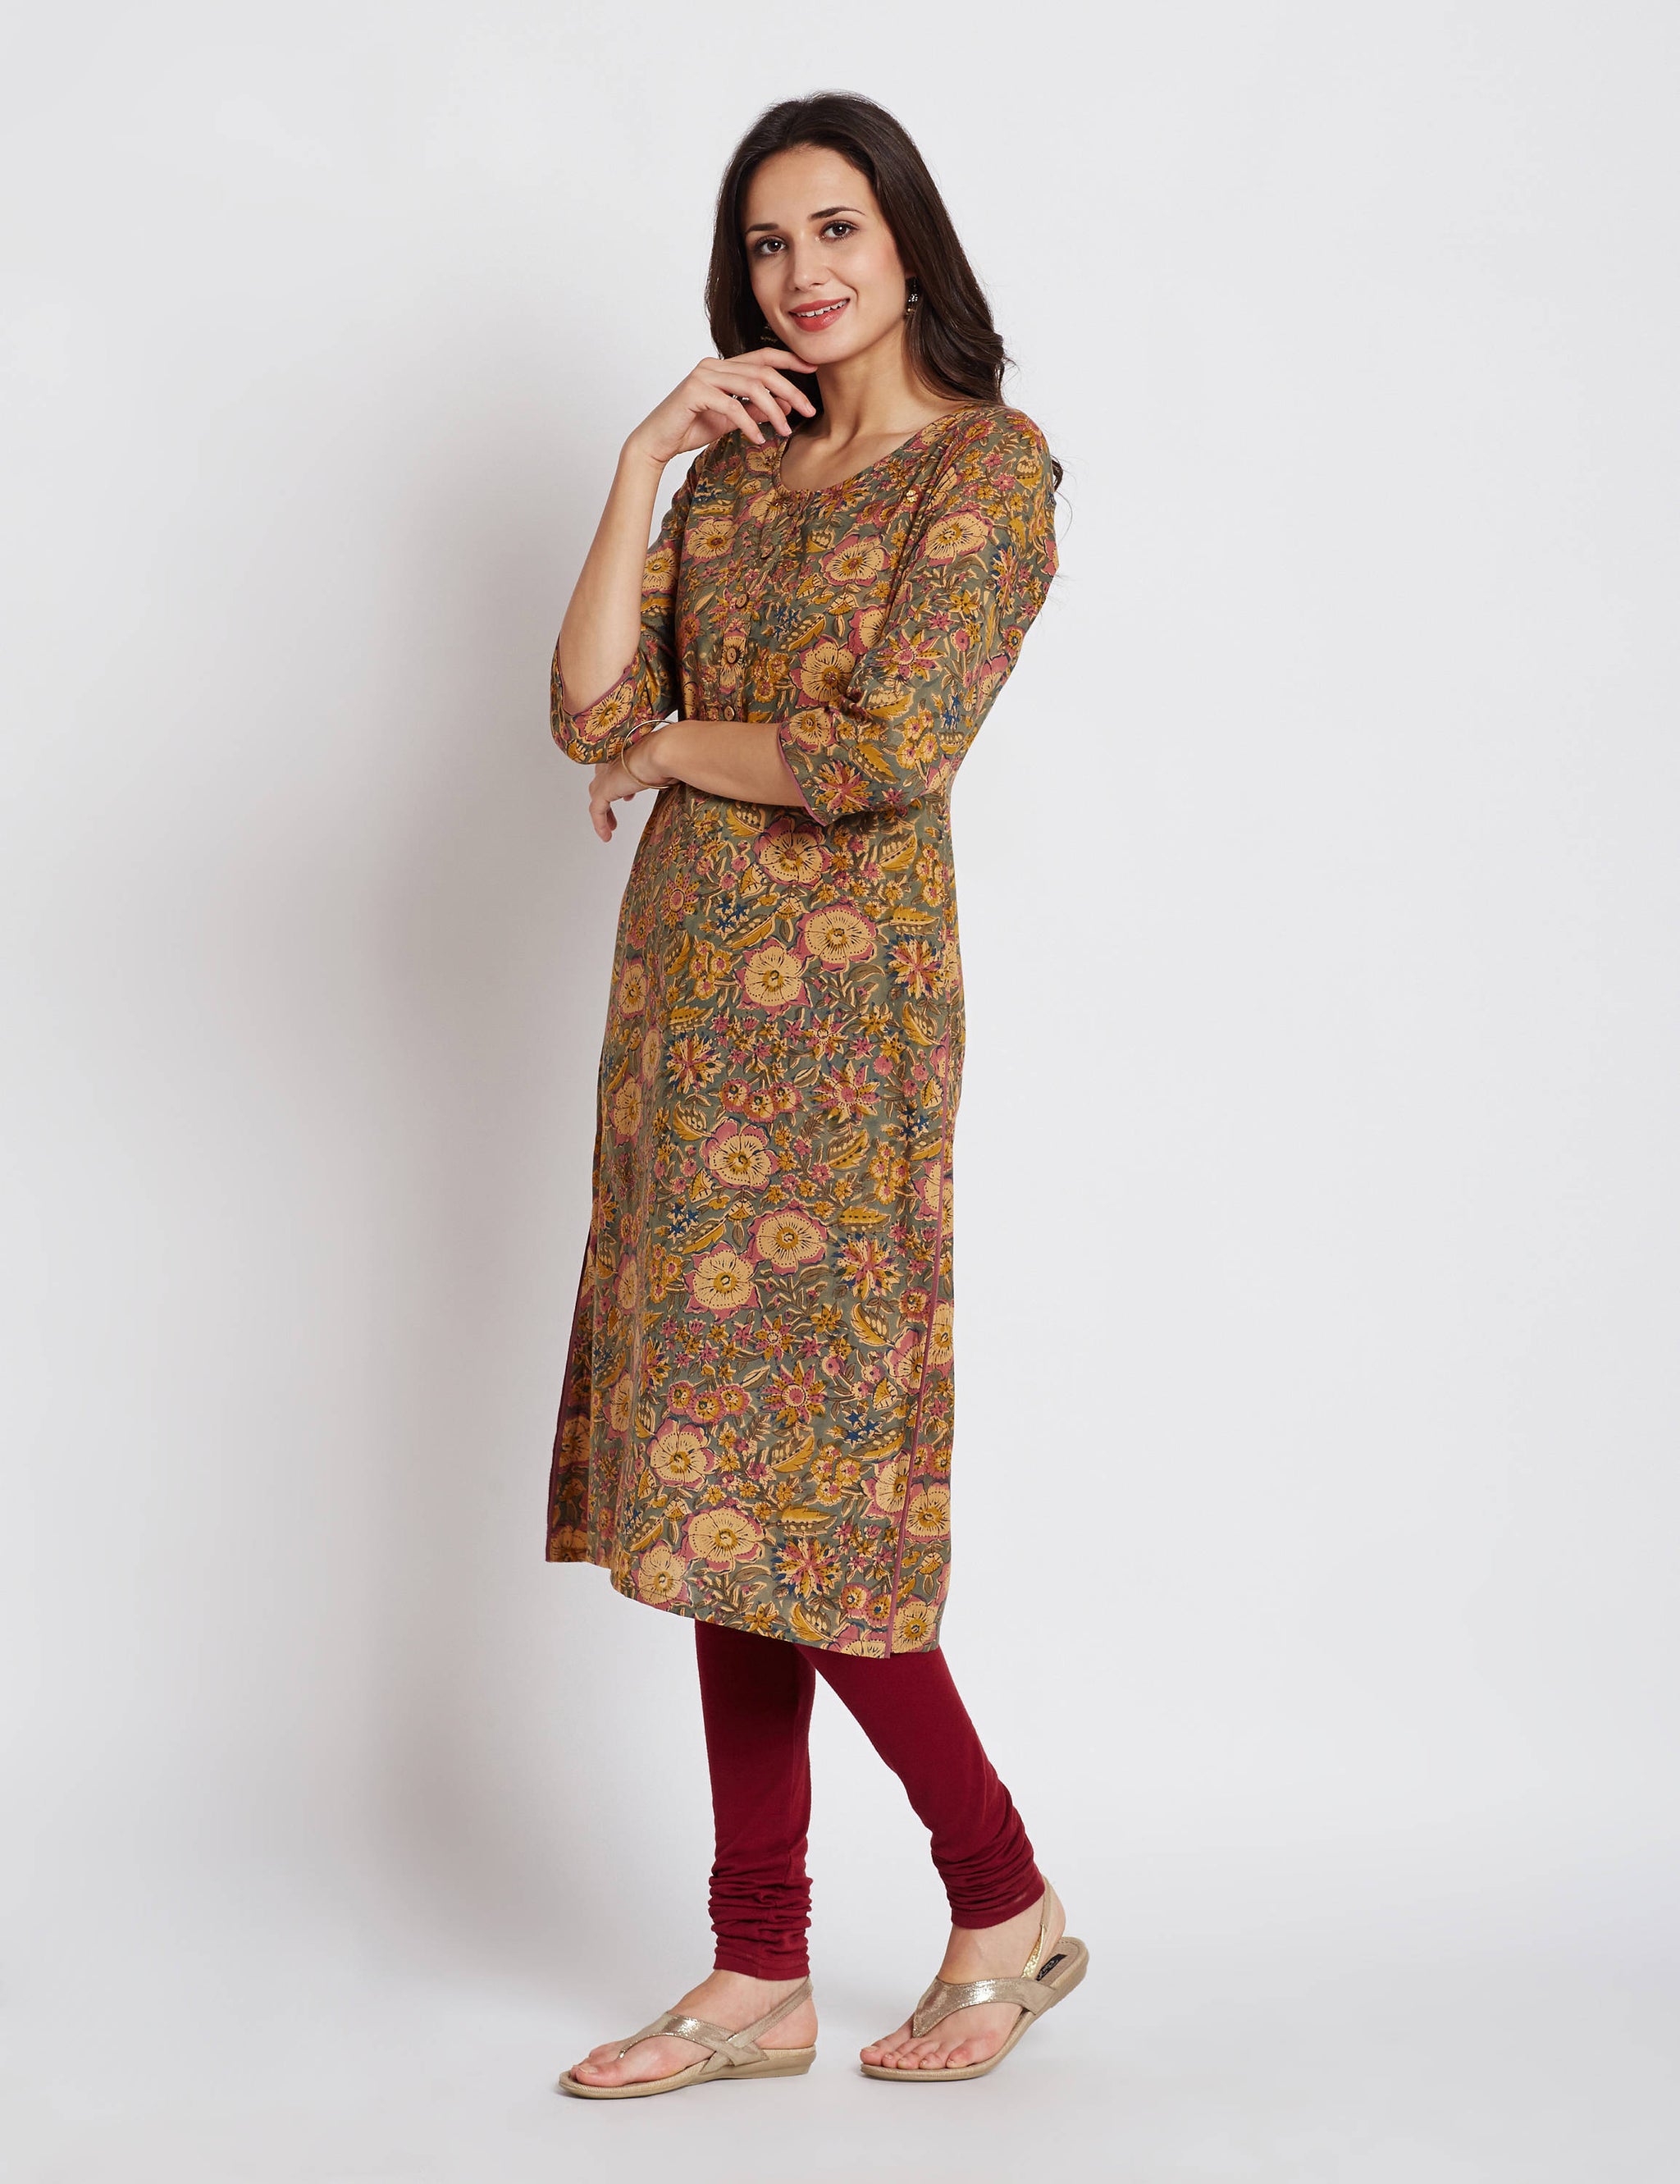 Hand block printed ethnic long Indian kurta with handwork, brass accessories on front  & trims on side slits